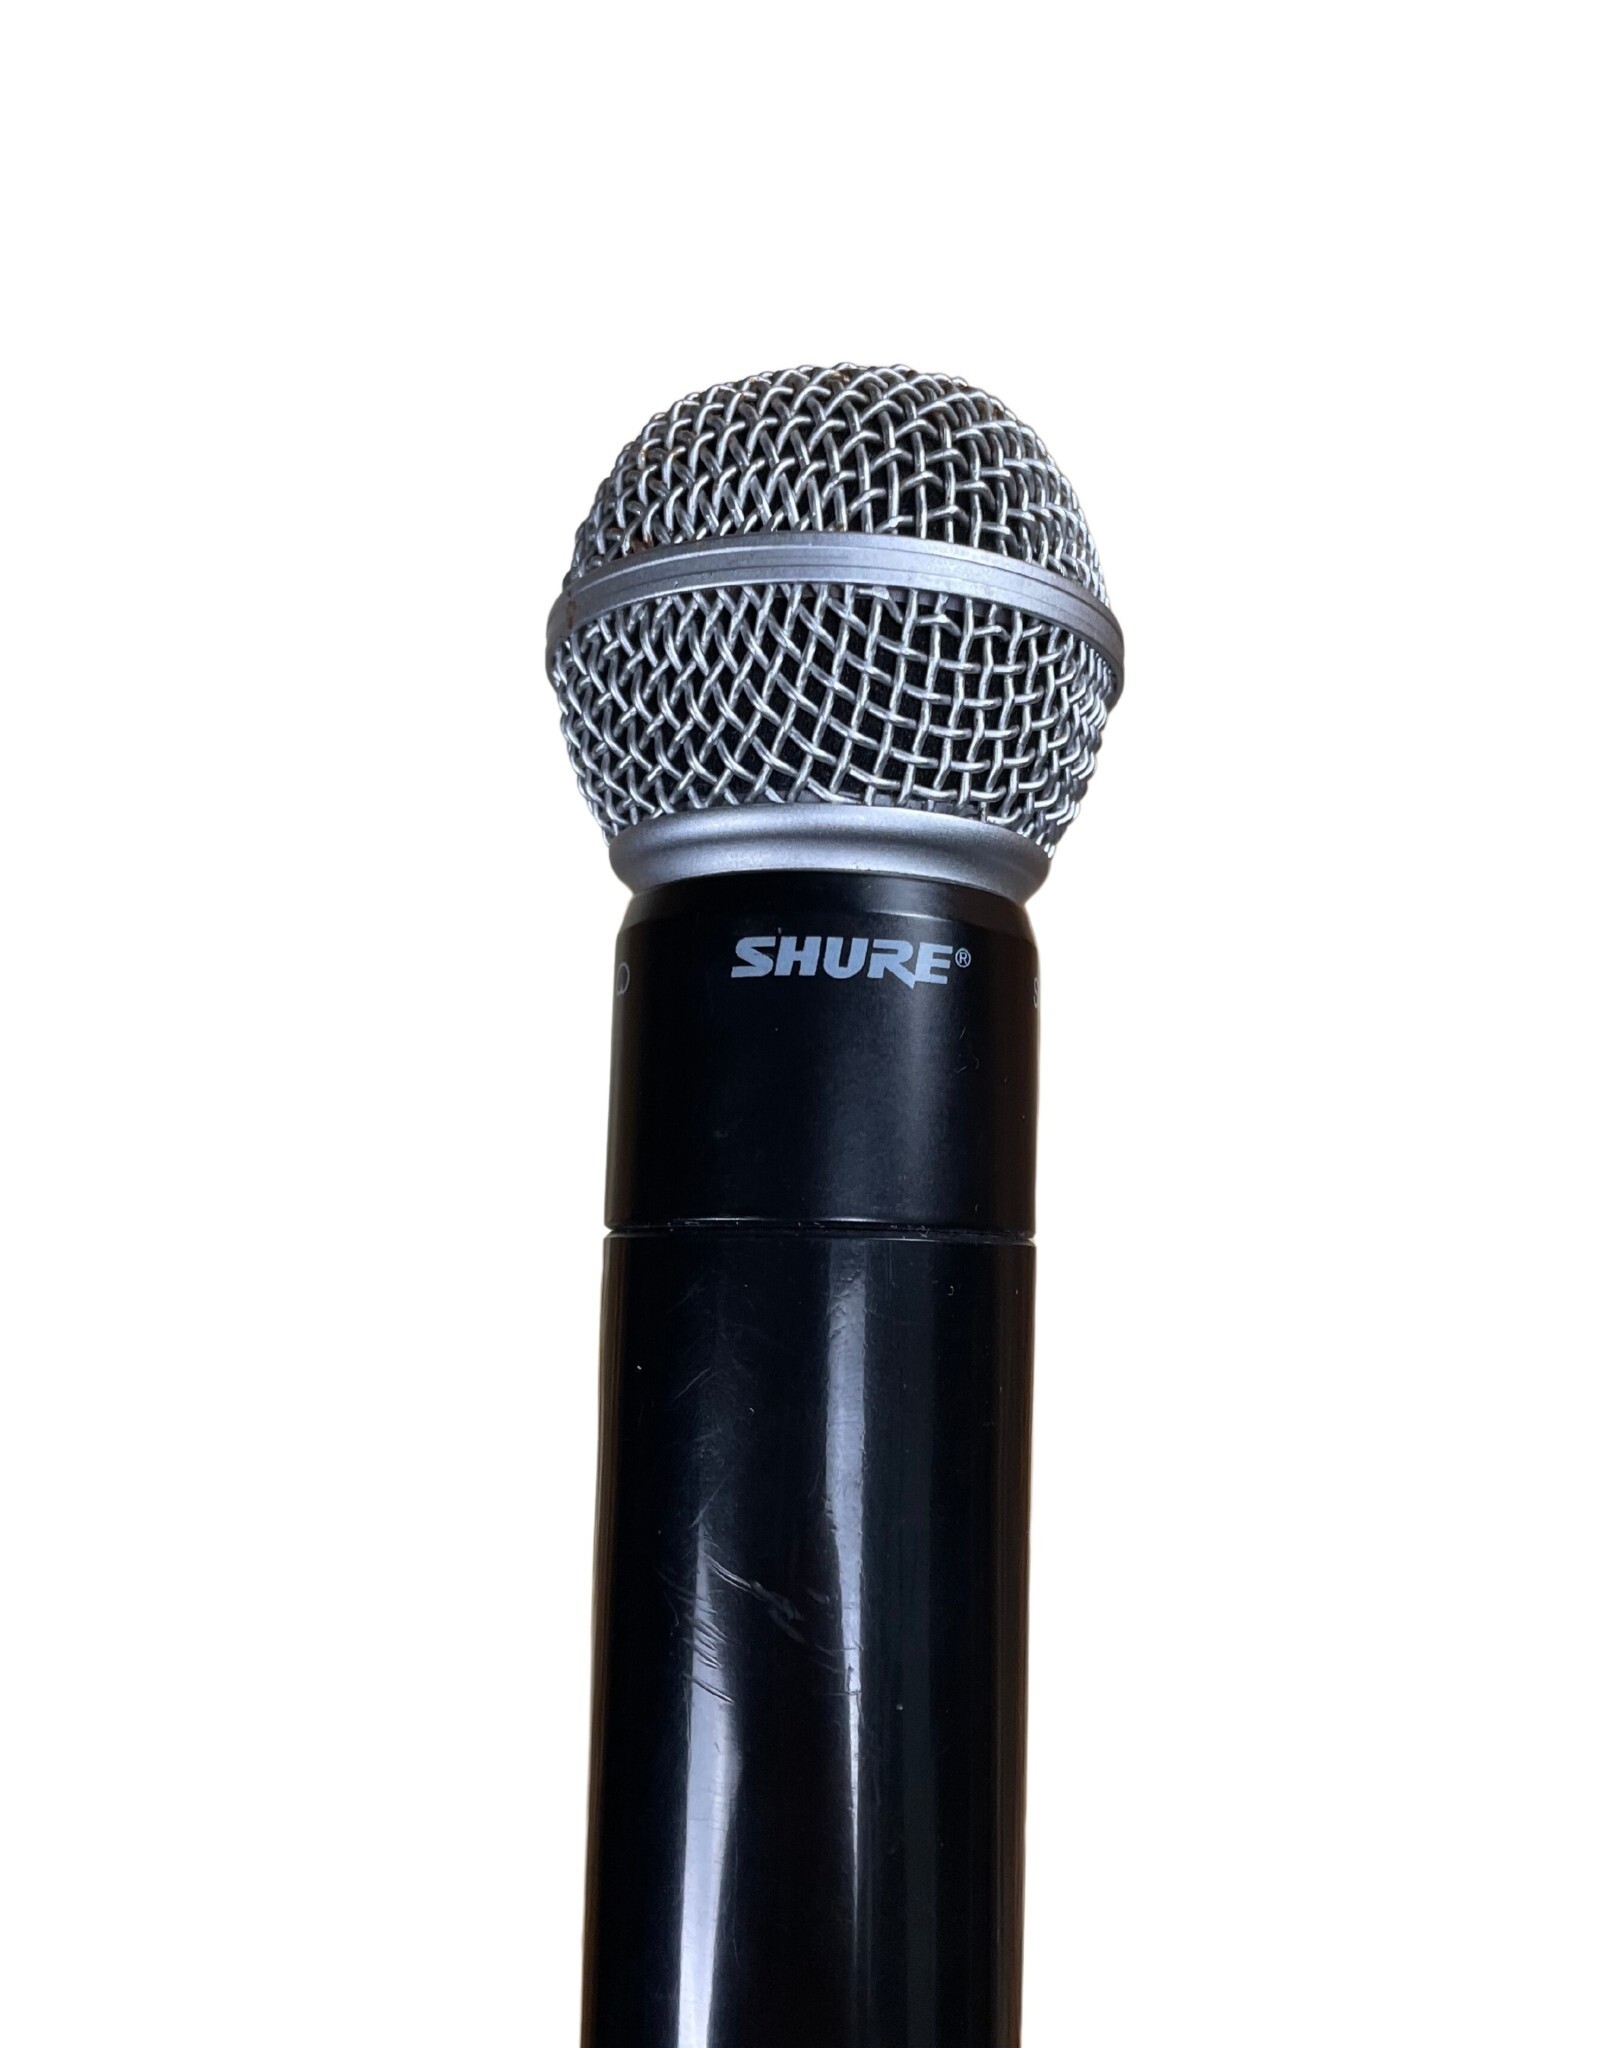 Shure Shure SM58 Wireless Mic w/ T4A-W Diversity Receiver and Hard Case (Used)